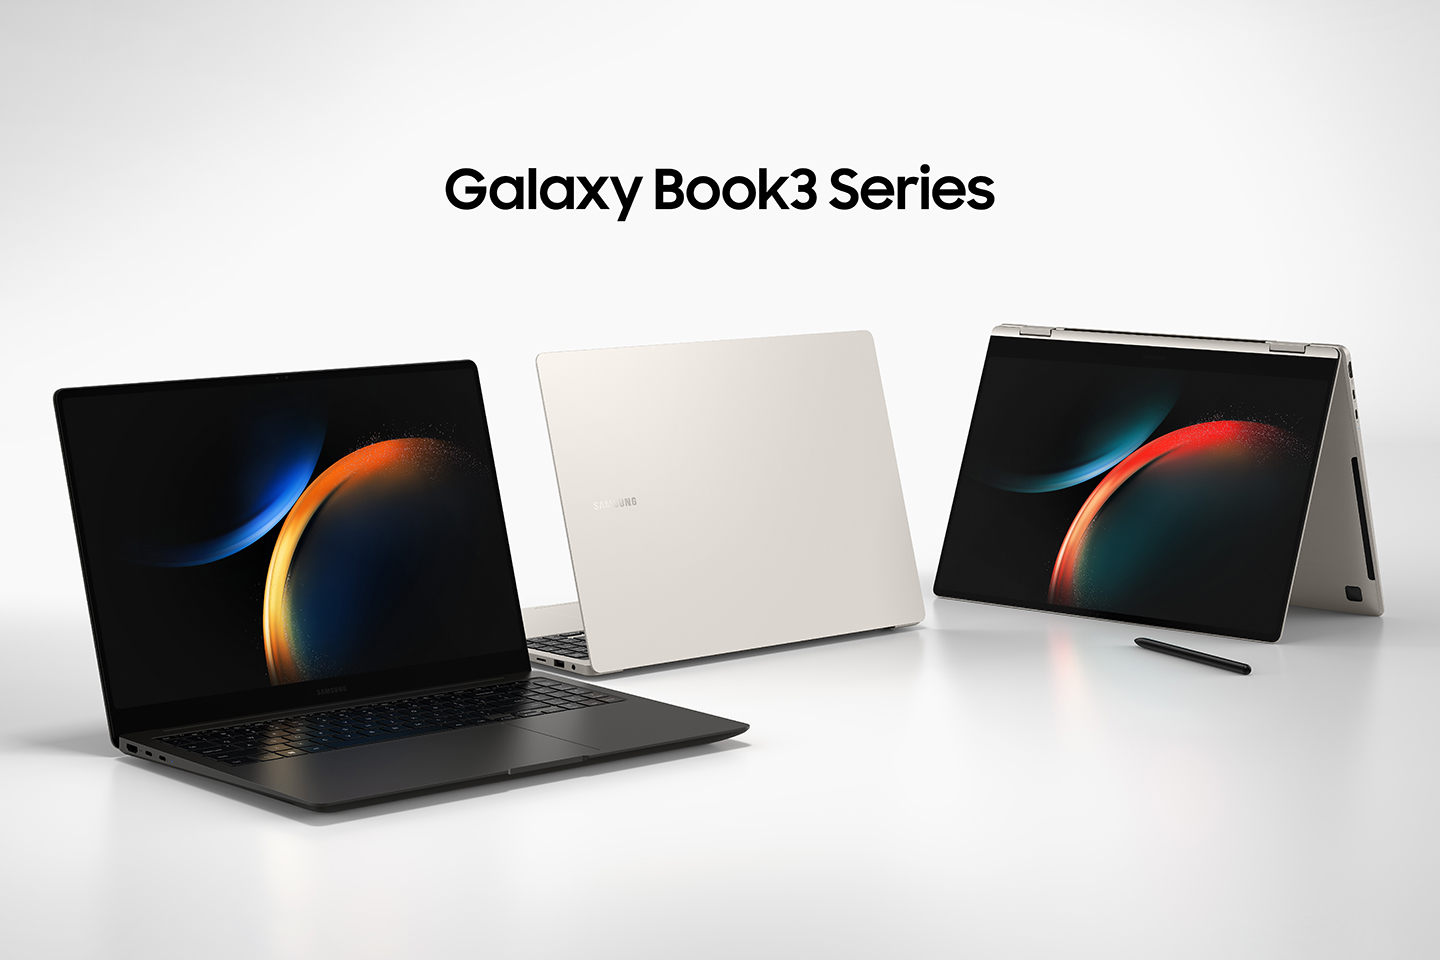 Galaxy Book 3 Ultra for Gaming